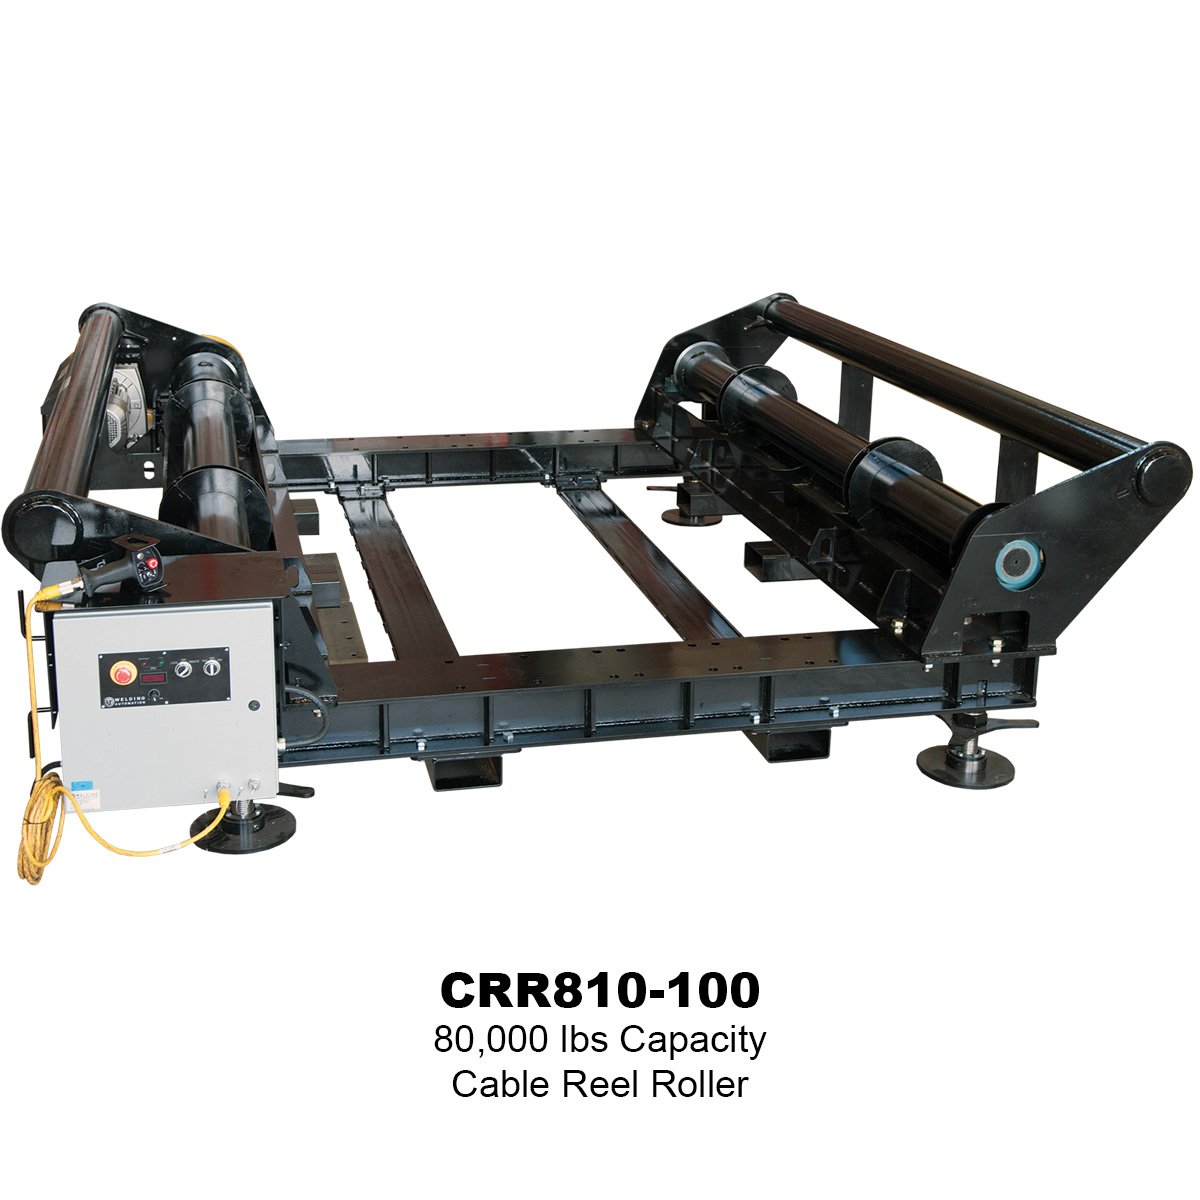 01-80000lbs-Cable-Reel-Roller